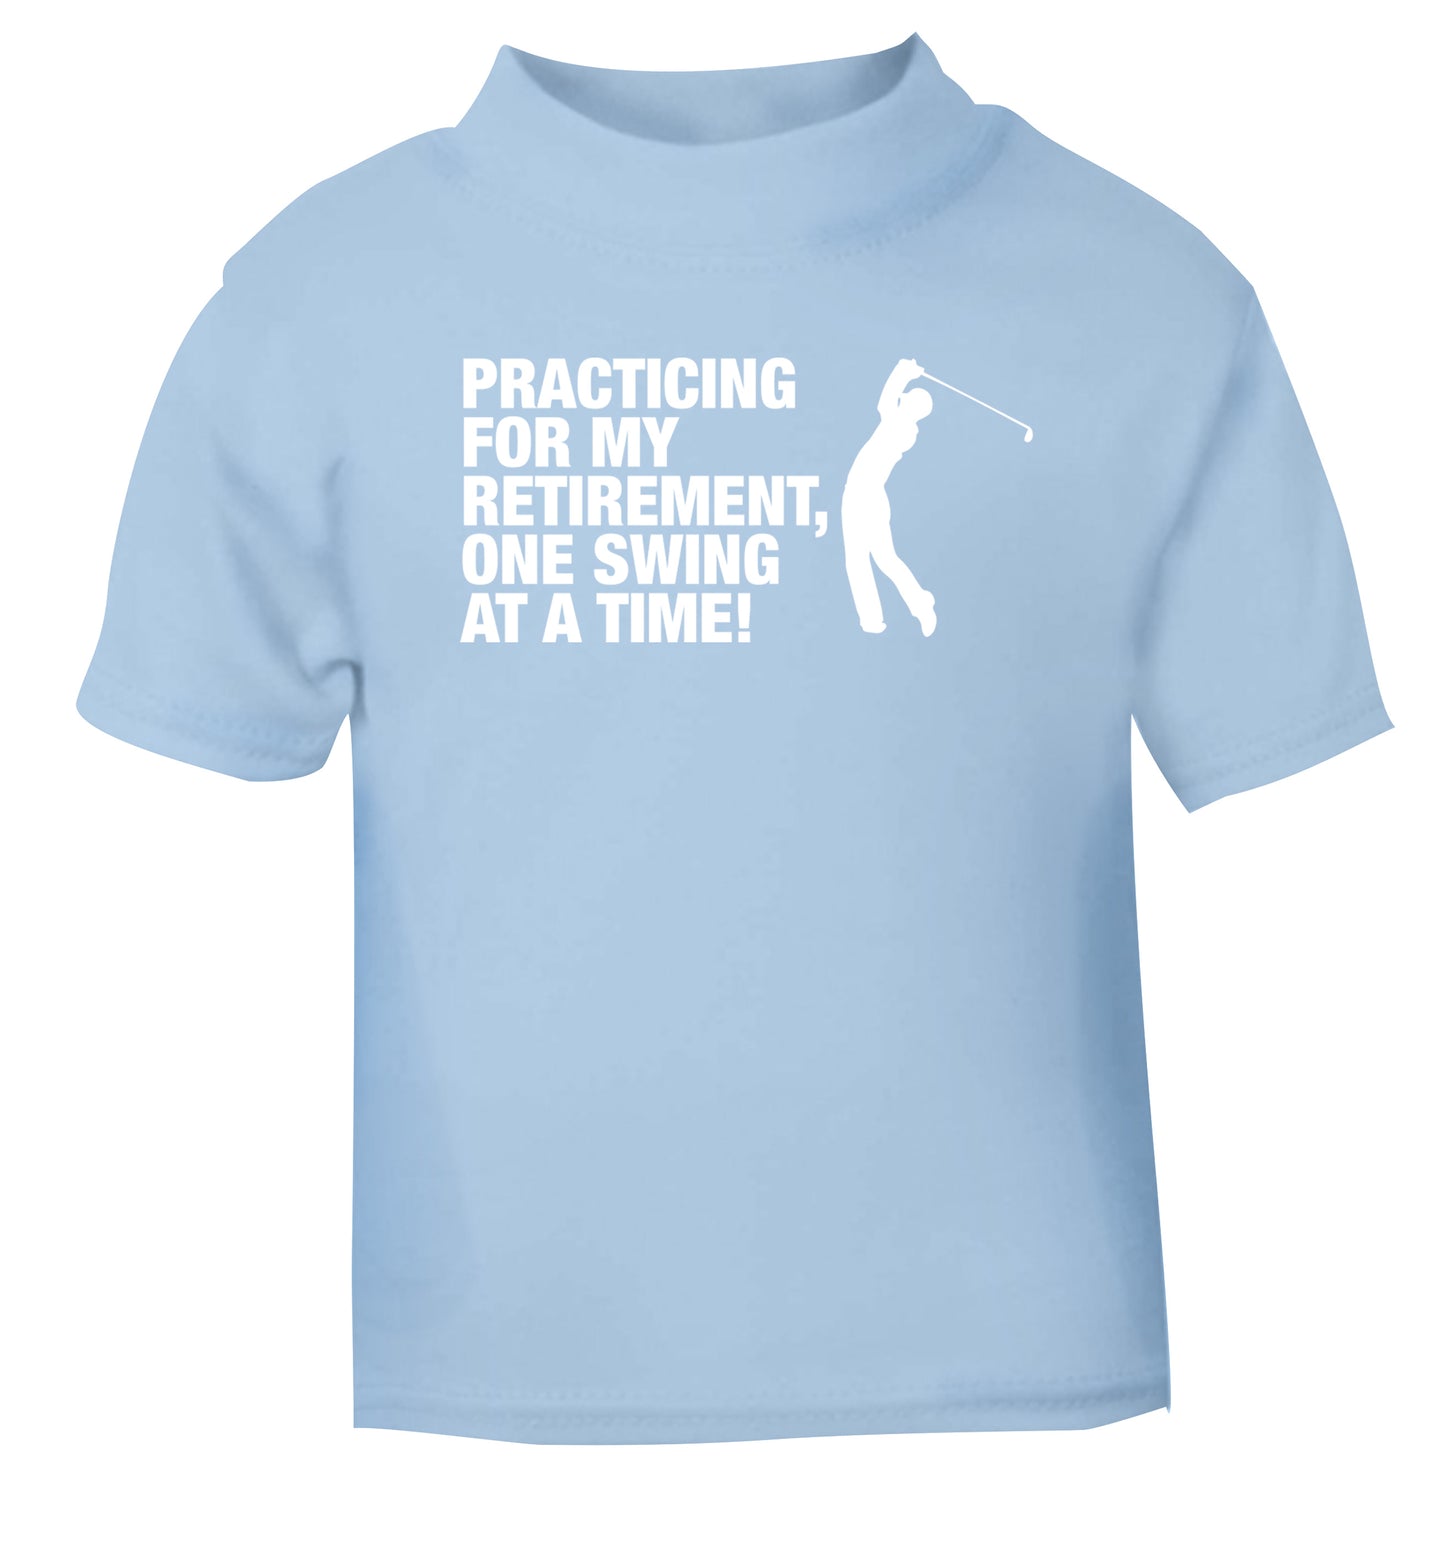 Practicing for my retirement one swing at a time light blue Baby Toddler Tshirt 2 Years